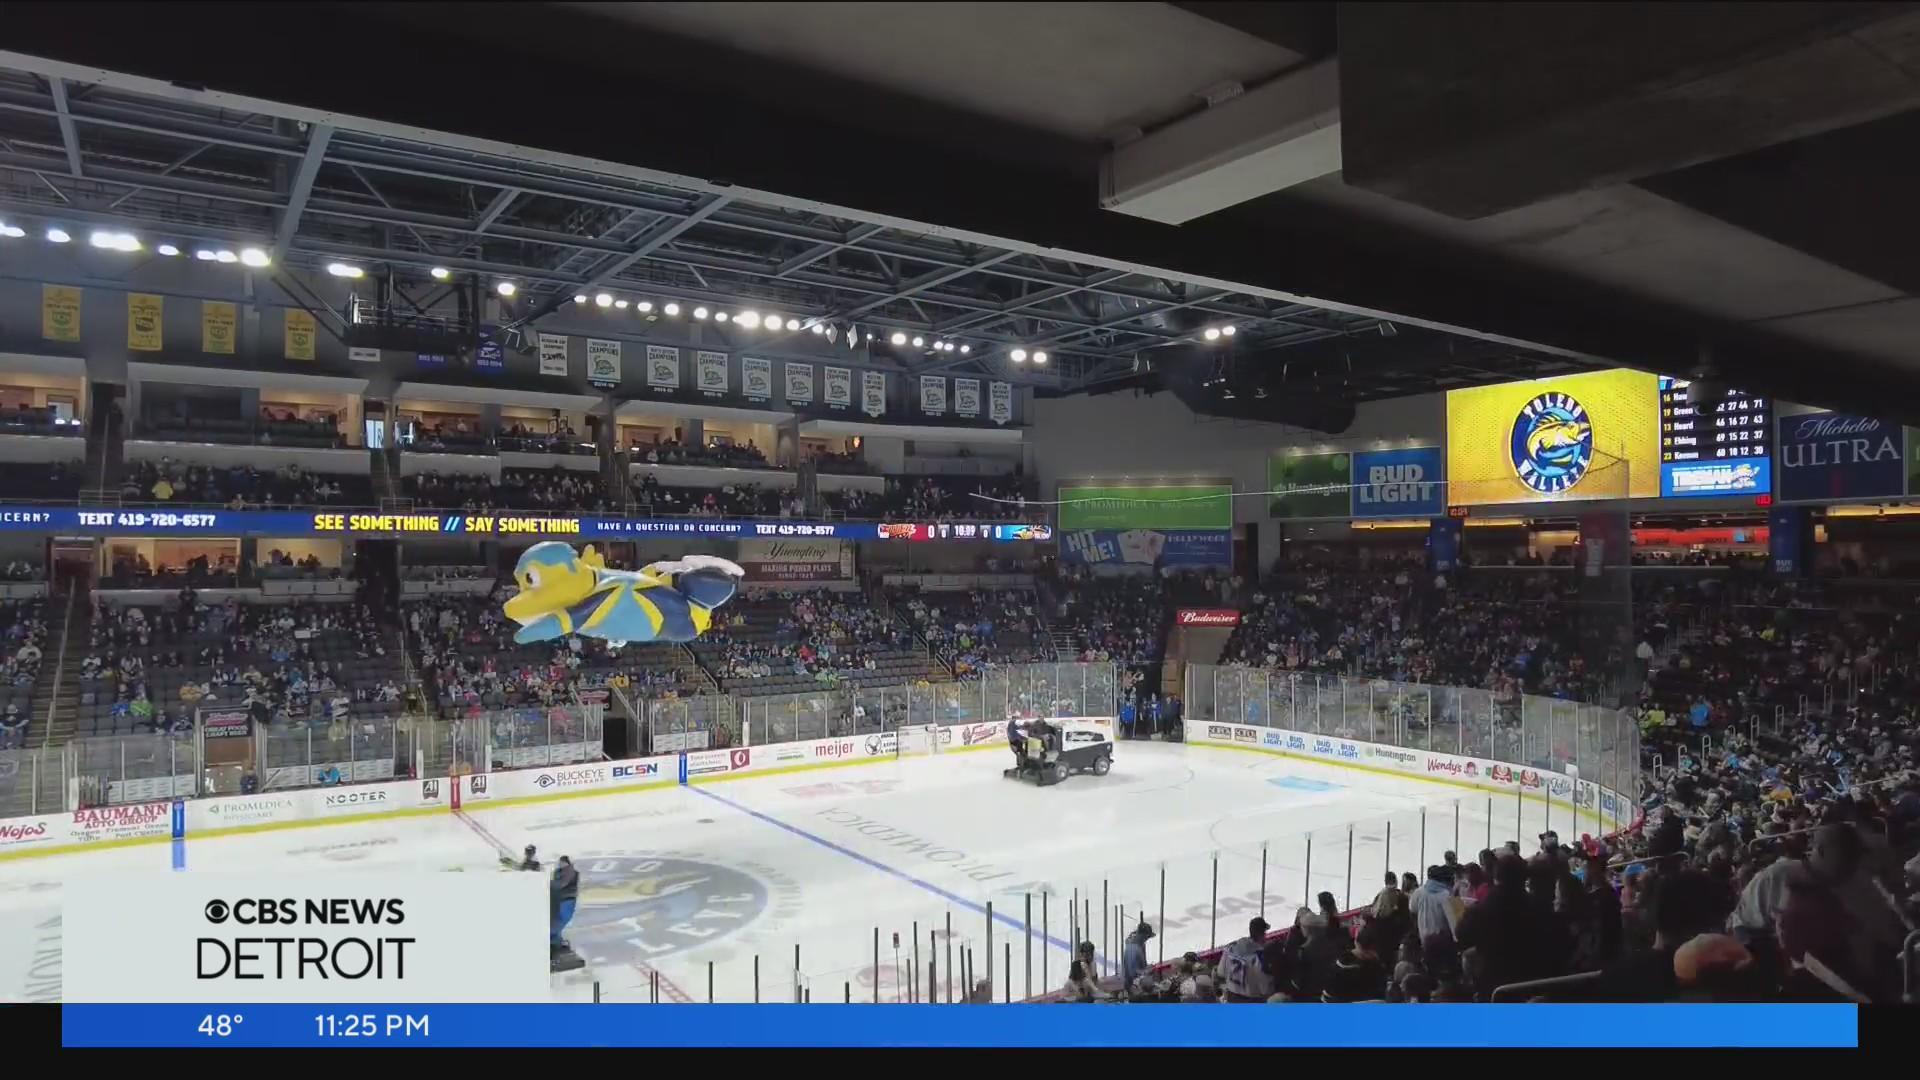 Toledo Walleye go for the win in the playoffs